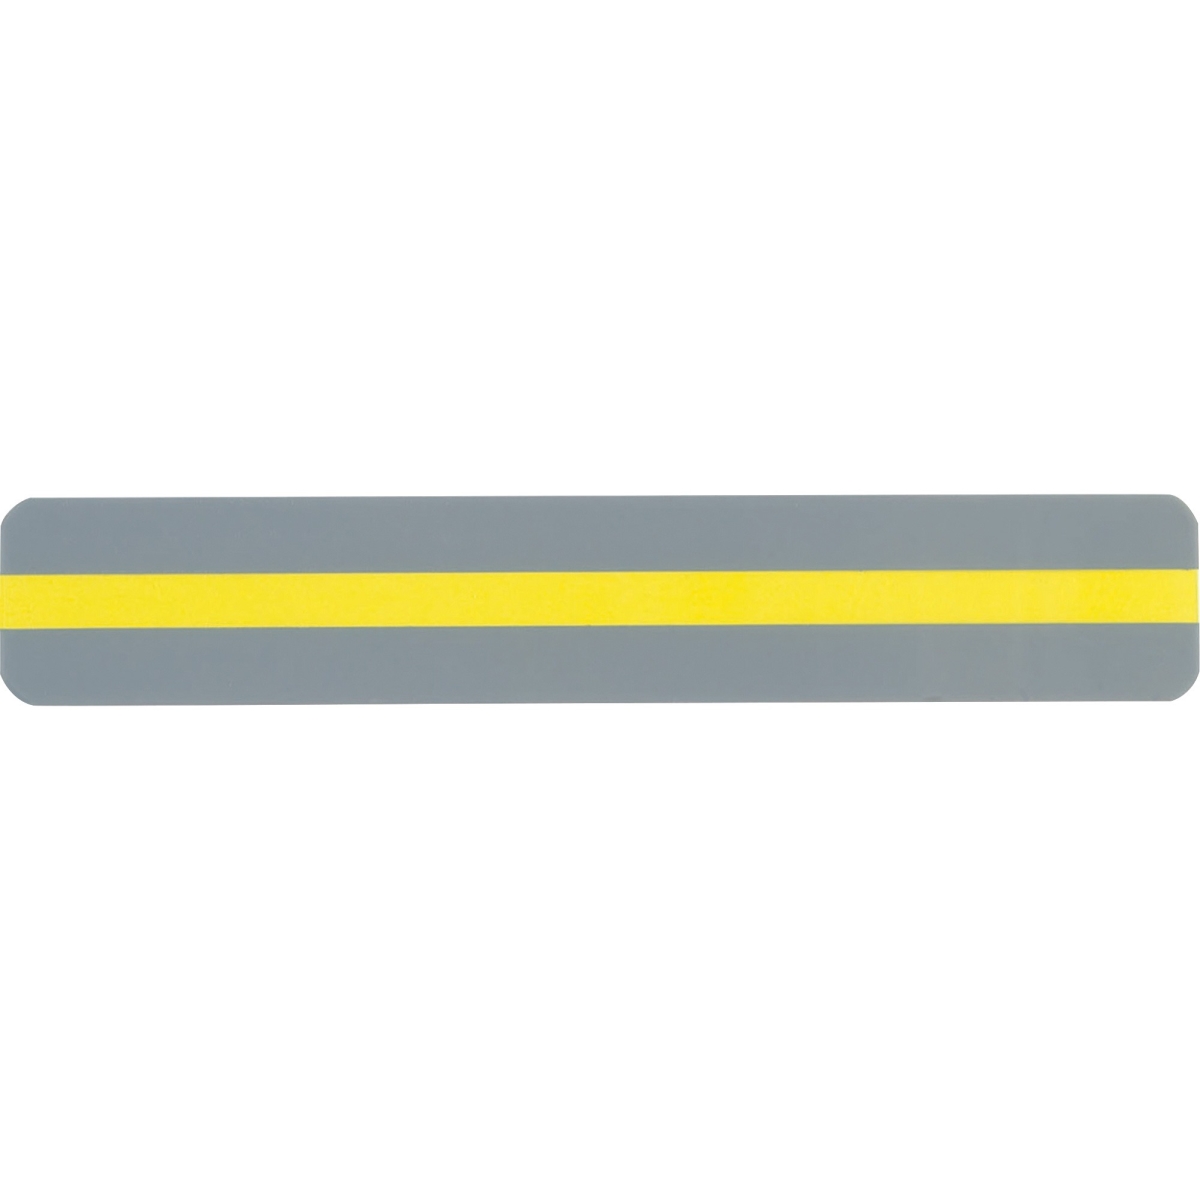 Ash10850 Reading Guide Strips, 12 Count - Yellow